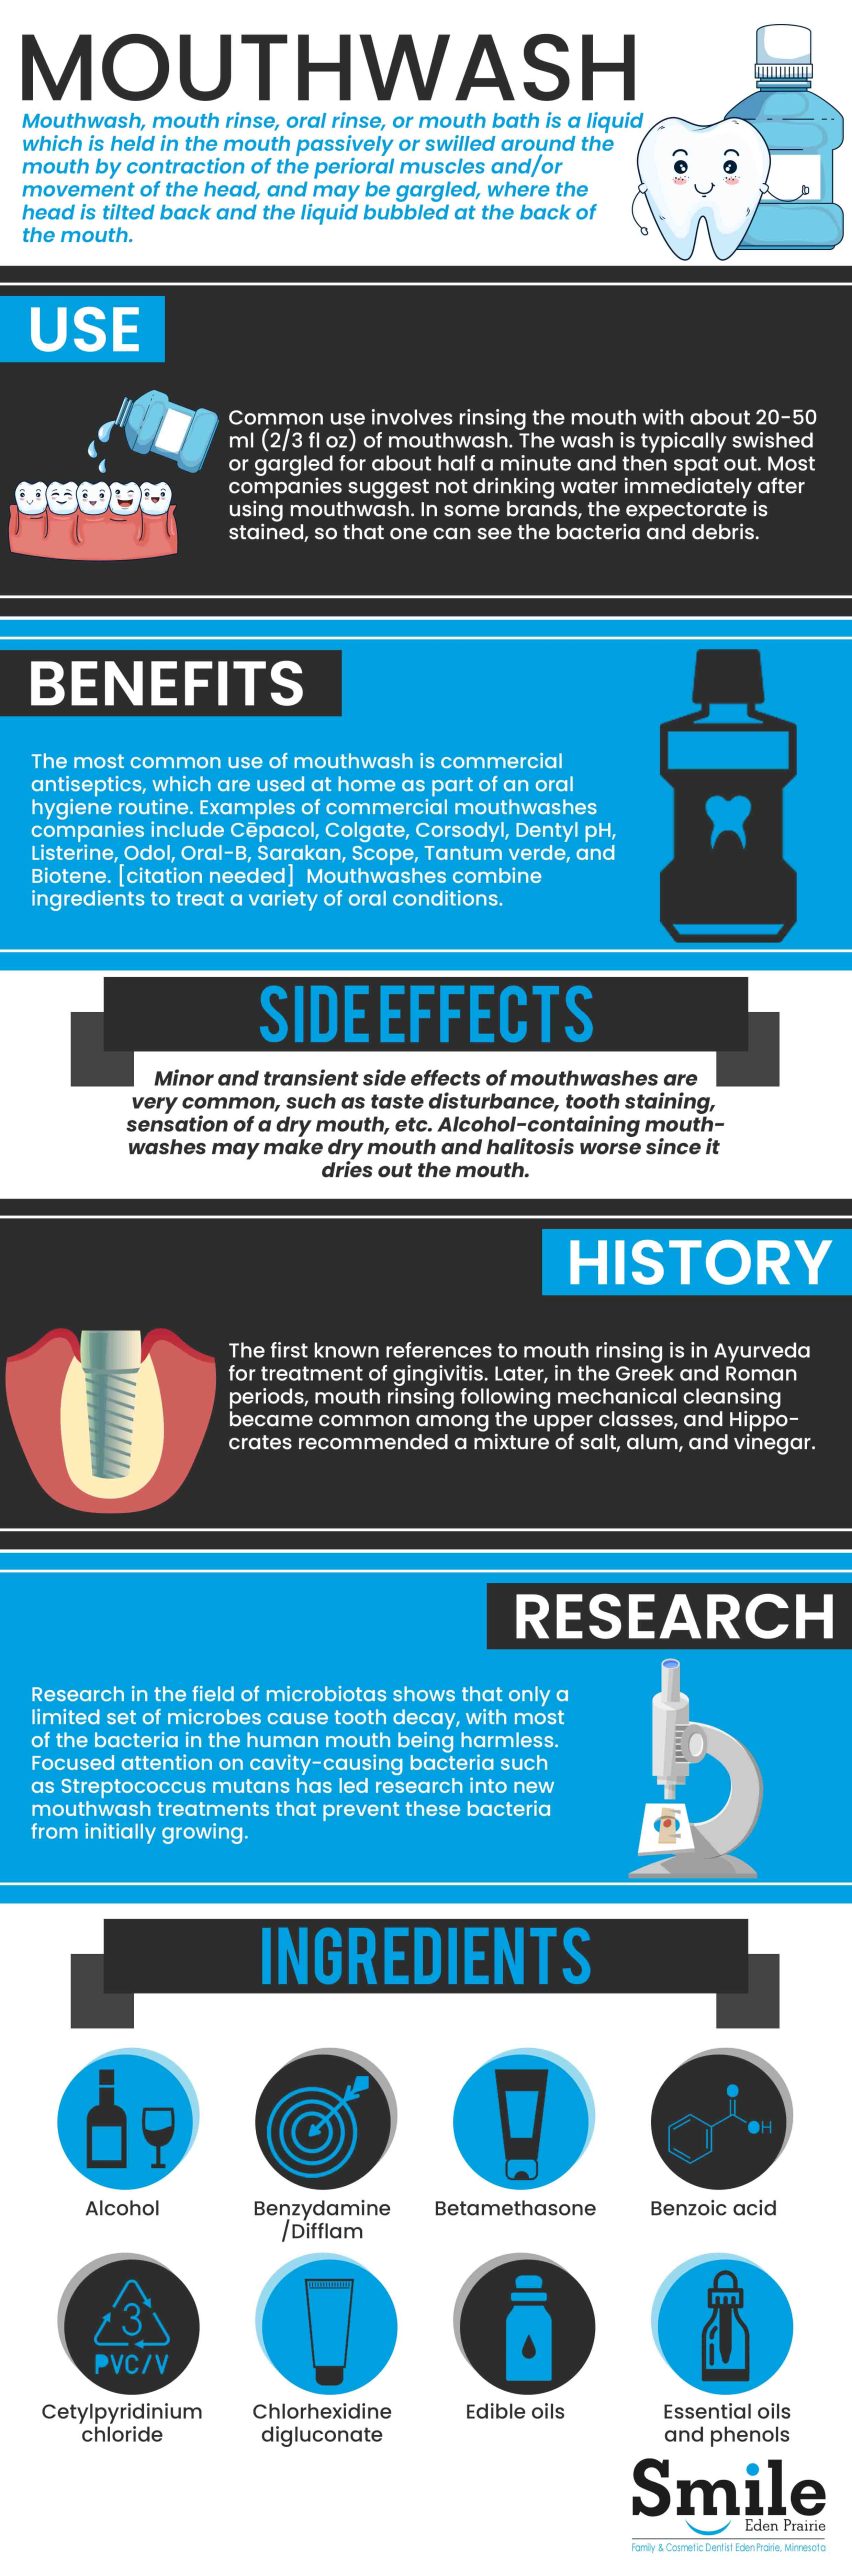 Why Mouthwash Matters: Benefits and Proper Usage